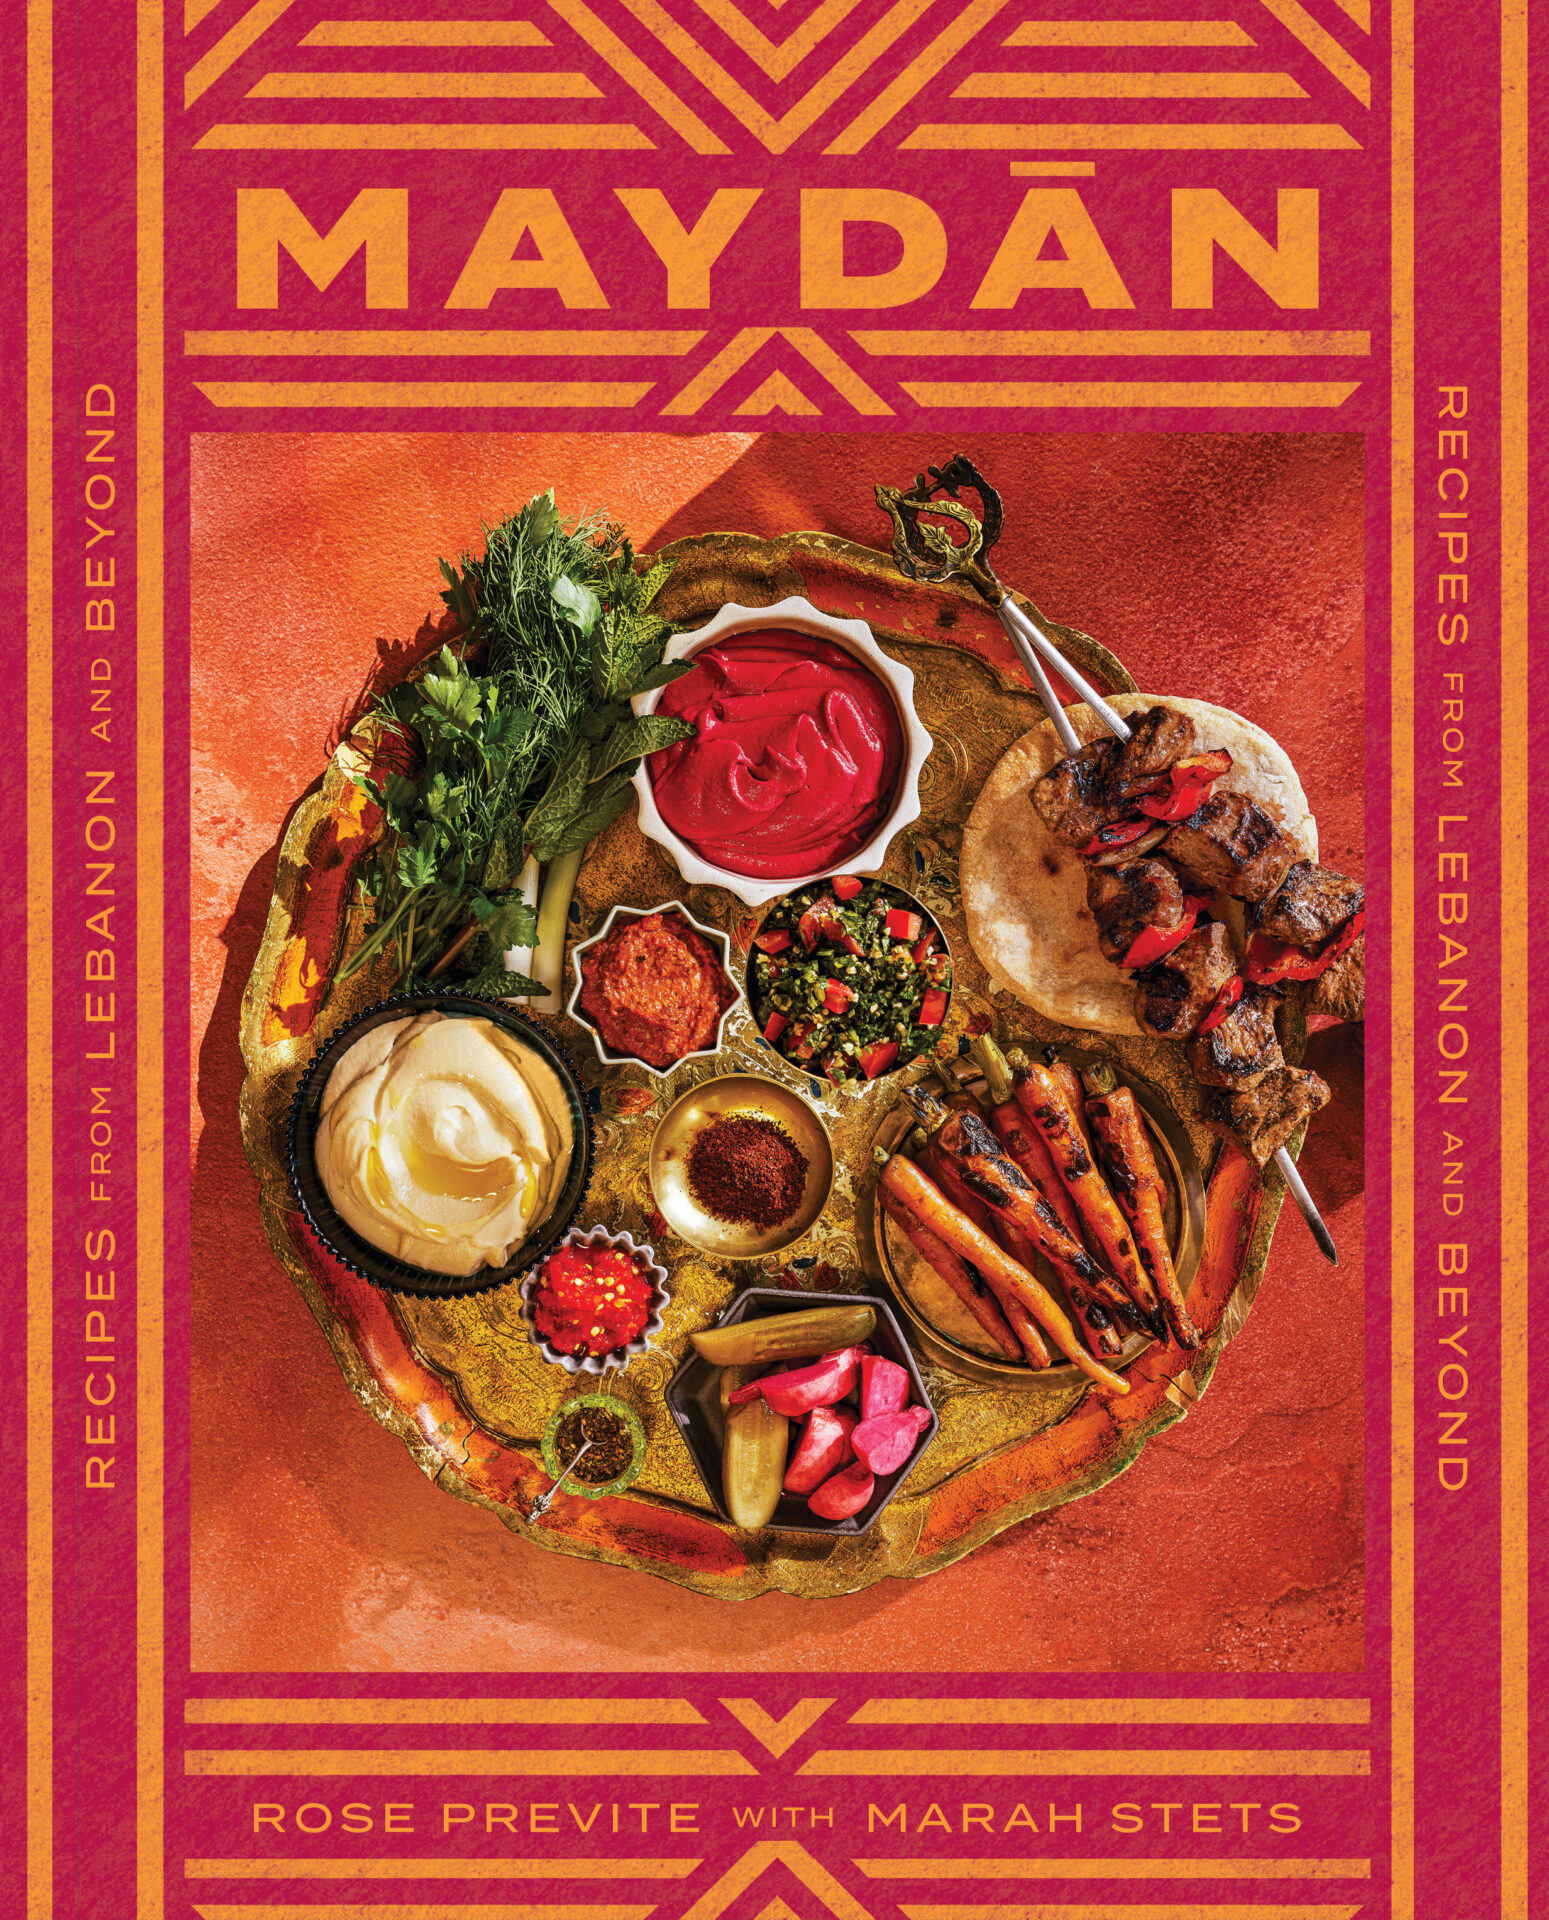 Maydan cover new subtitle